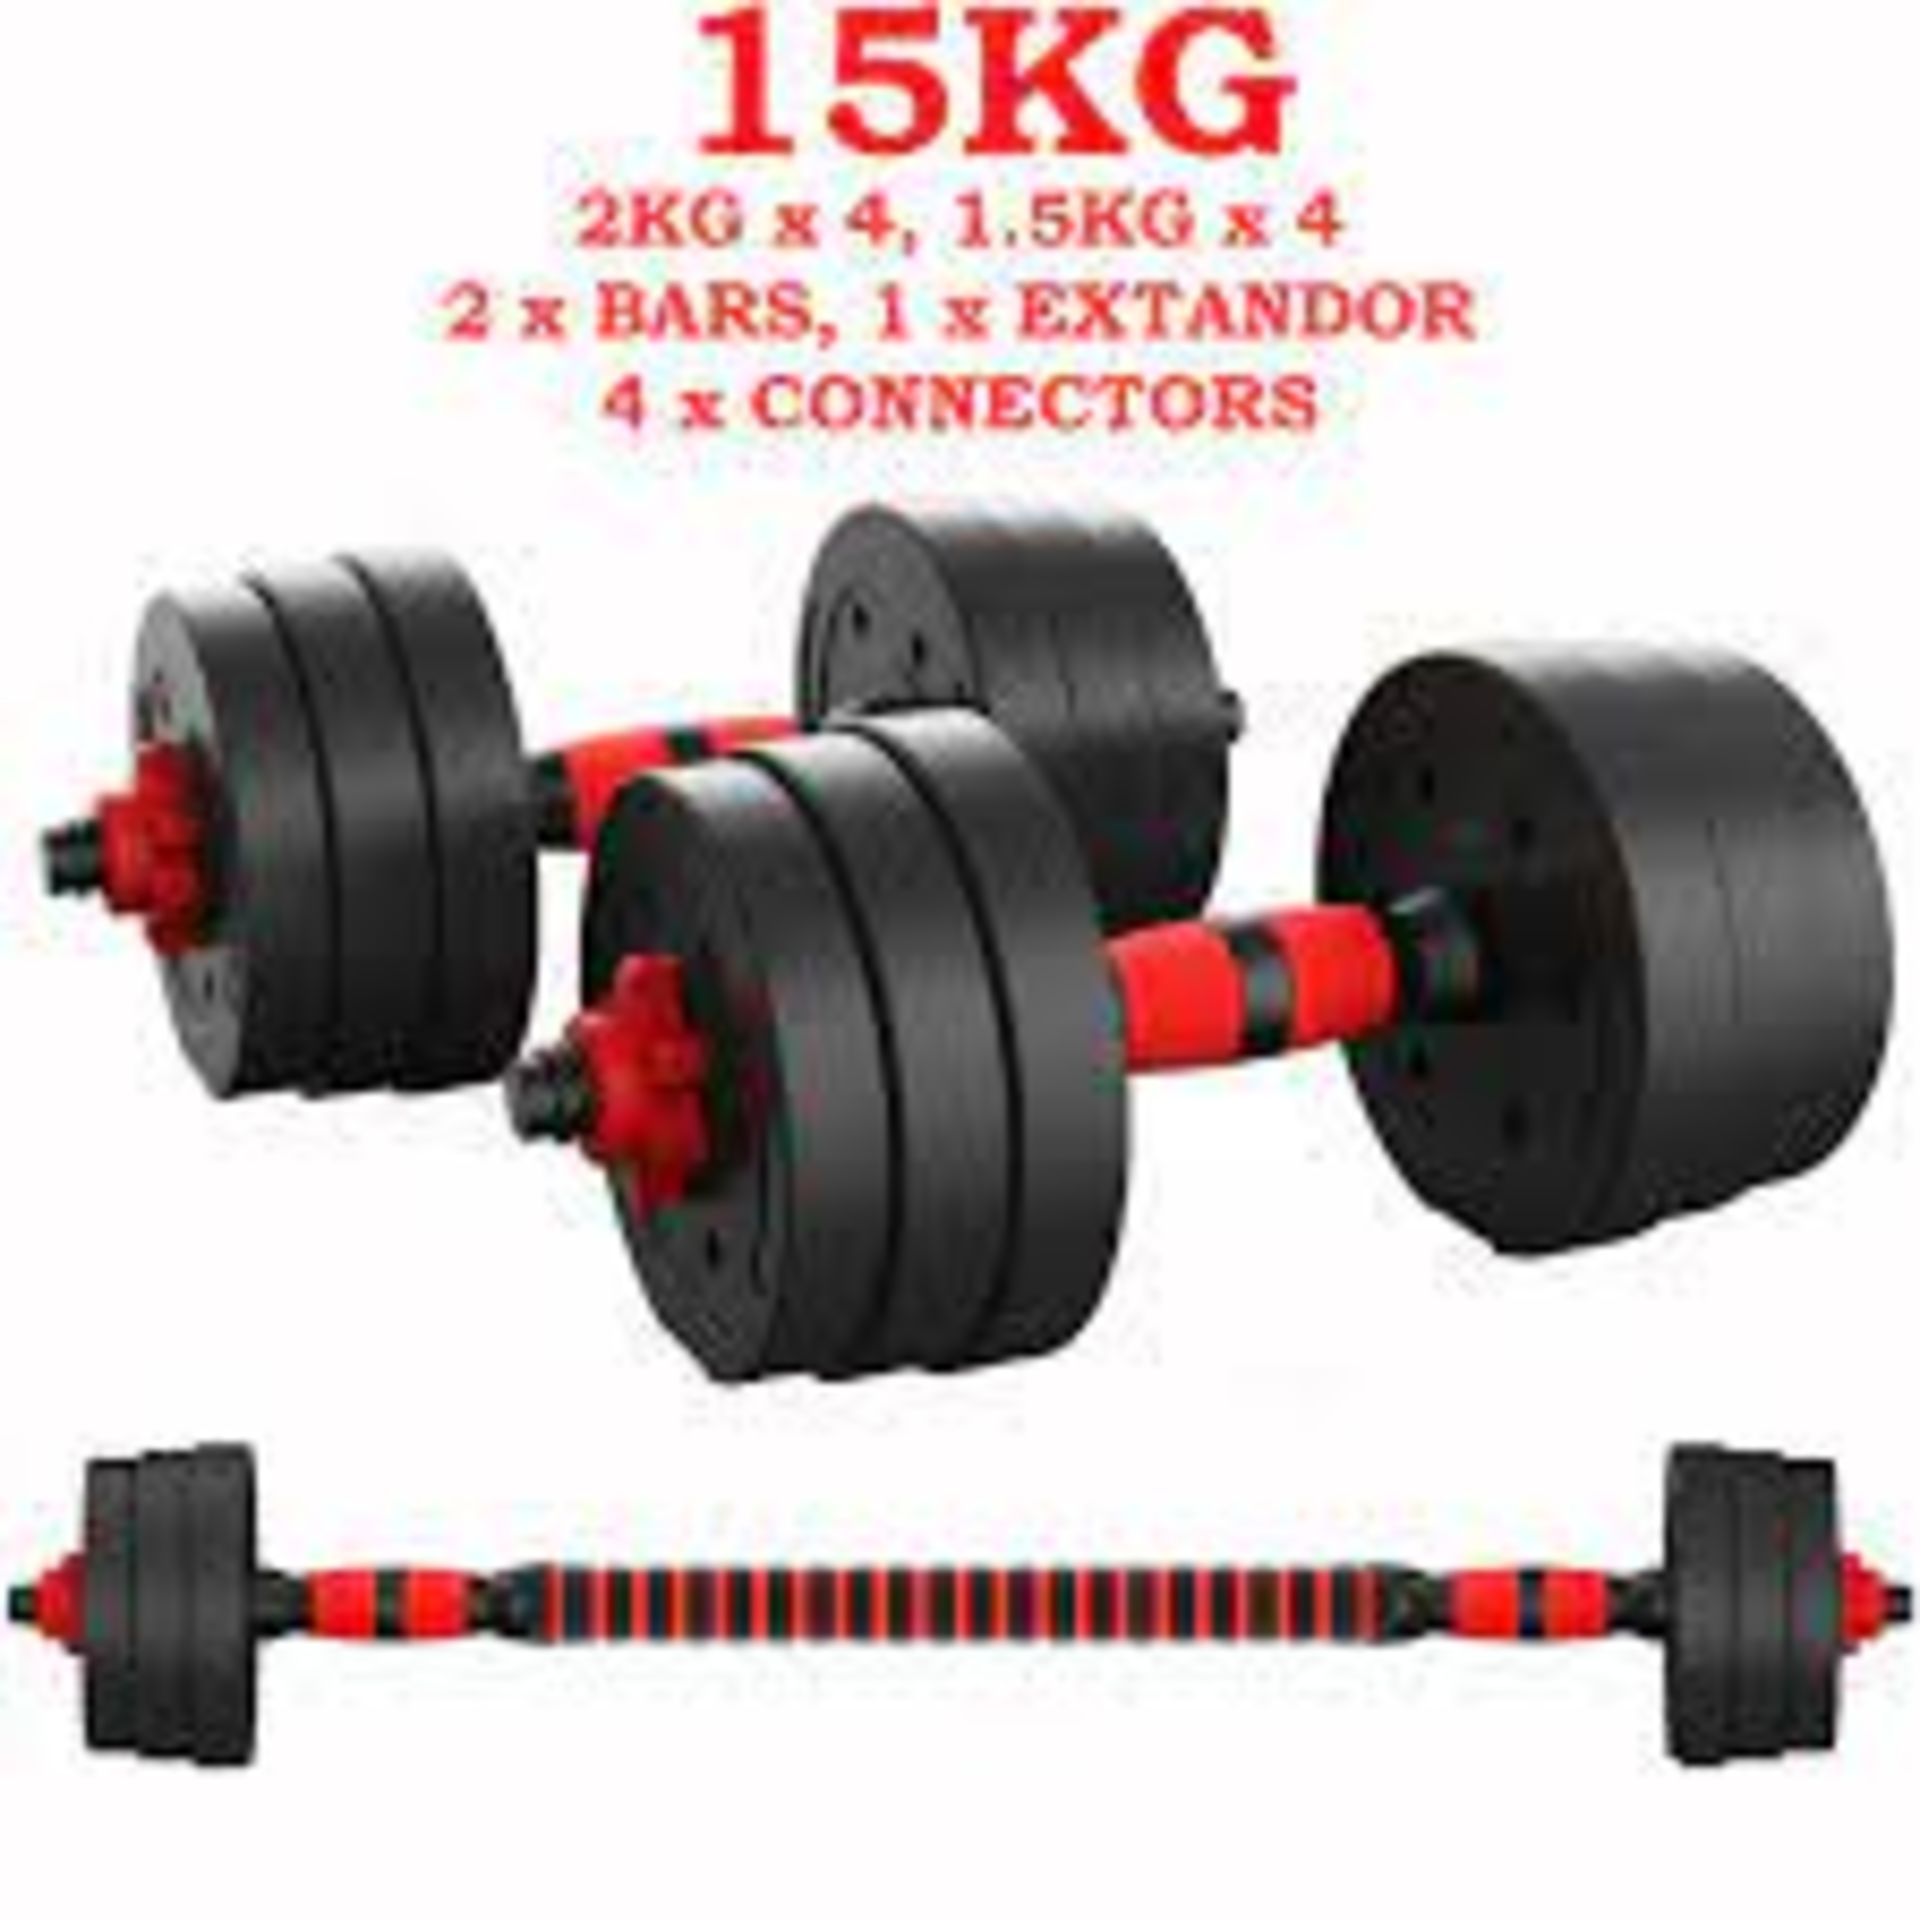 3 X NEW BOXED SETS OF 15KG BARBELL/DUMBELL SETS. RRP £100 EACH. R3